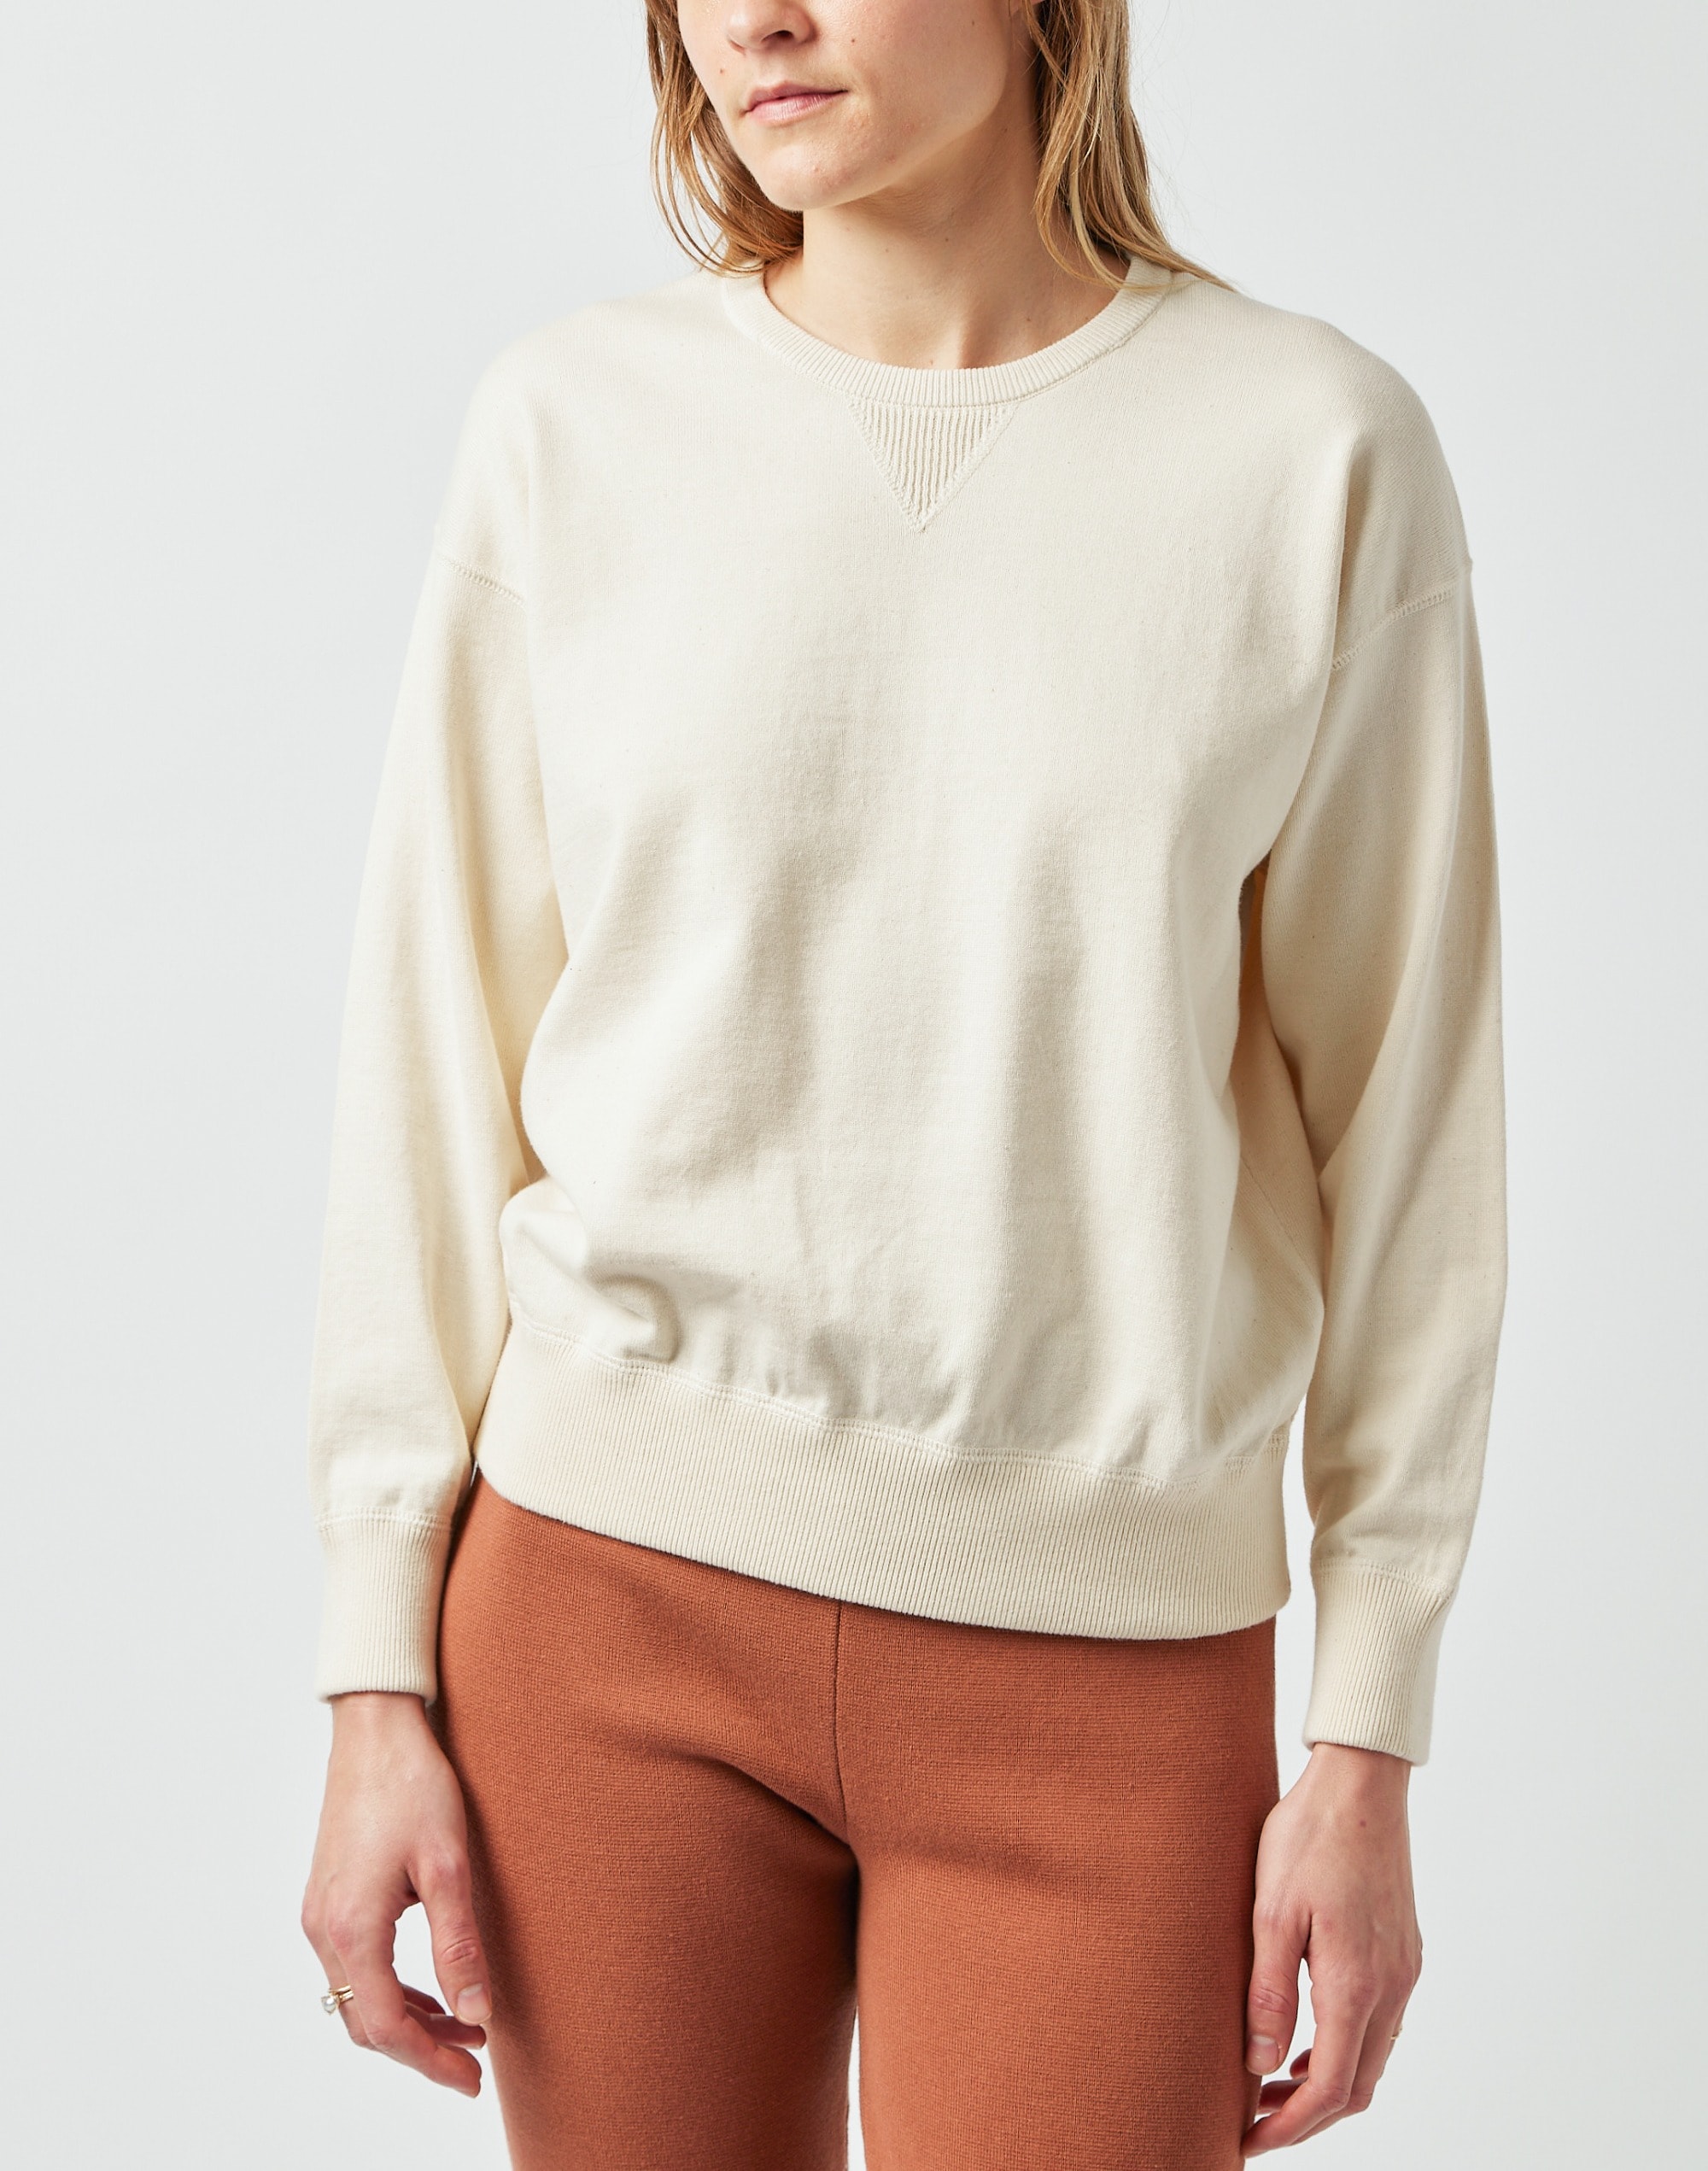 DEMY BY DEMYLEE Jacques Sweater